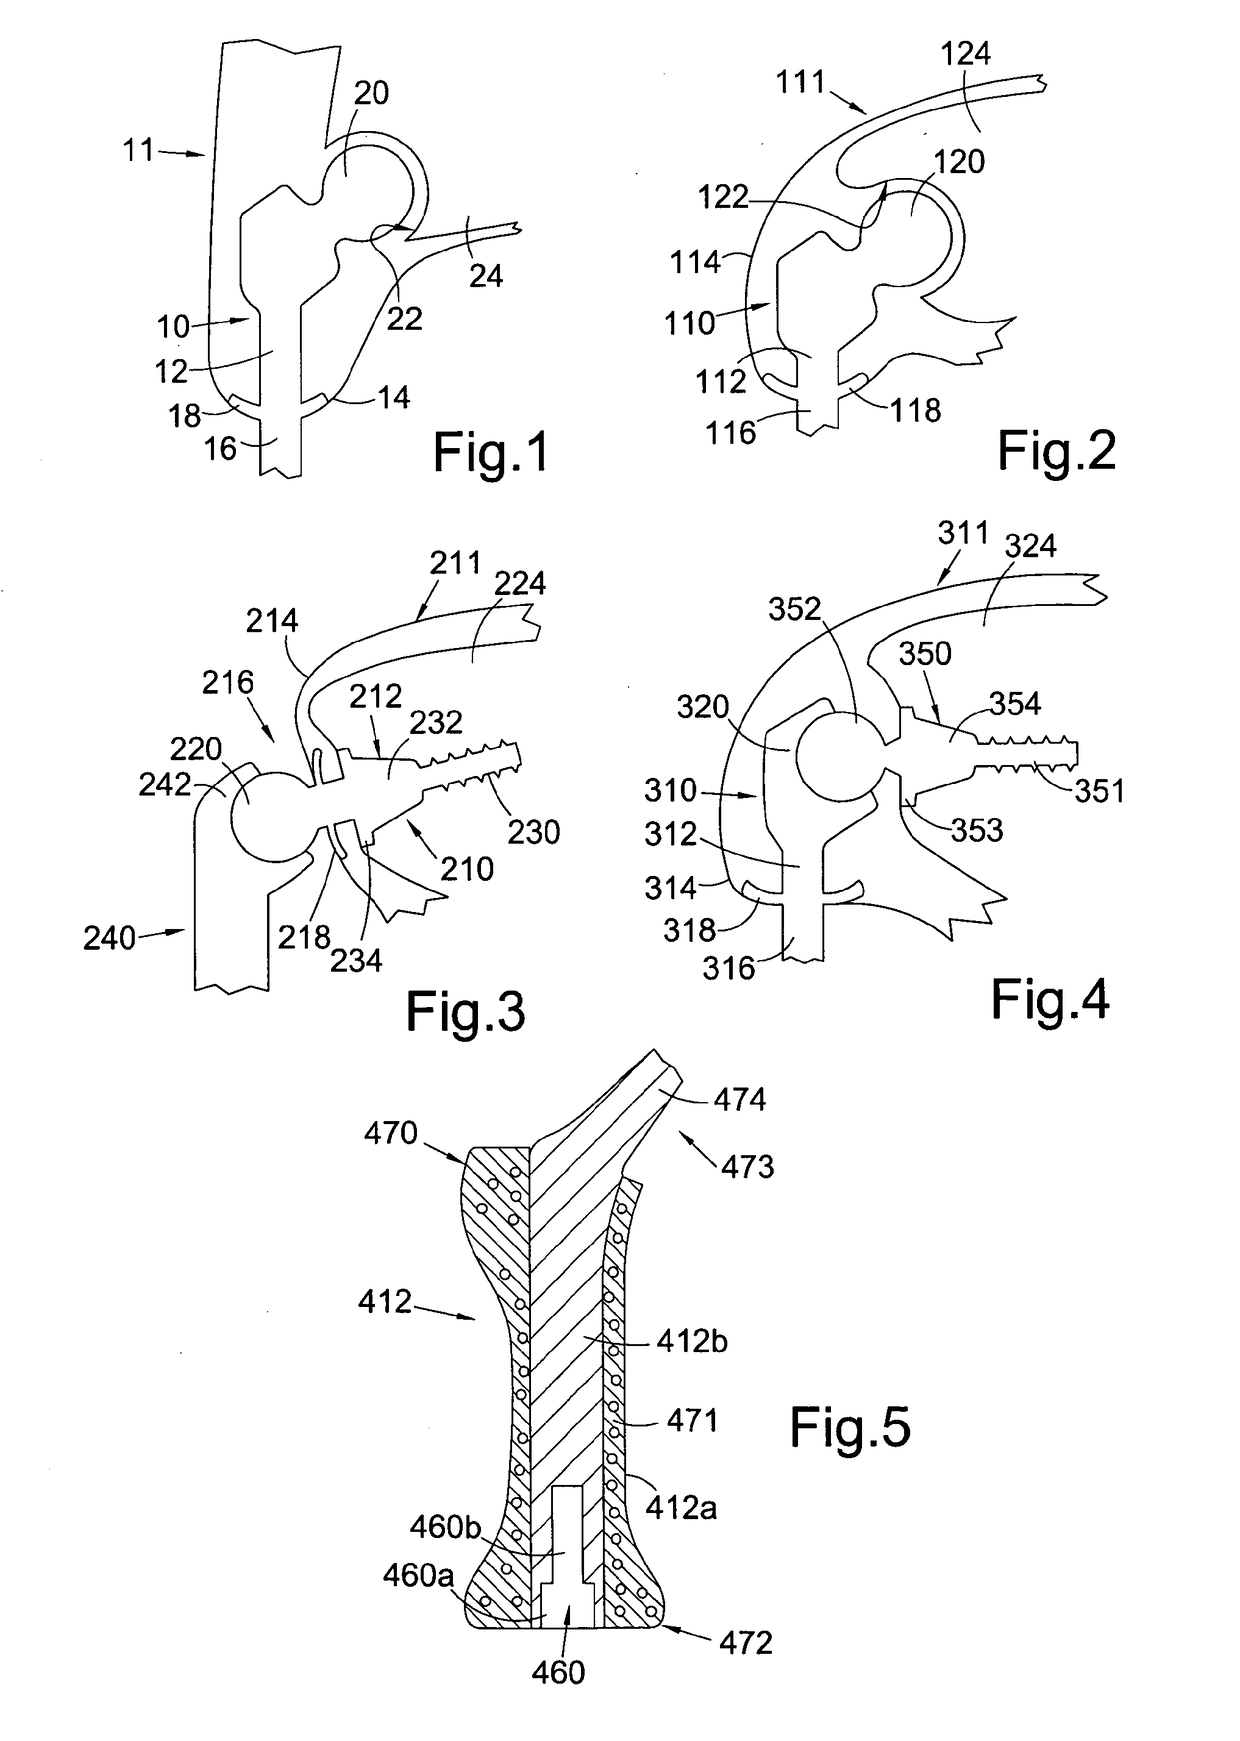 Method of Installing a Percutaneous Device